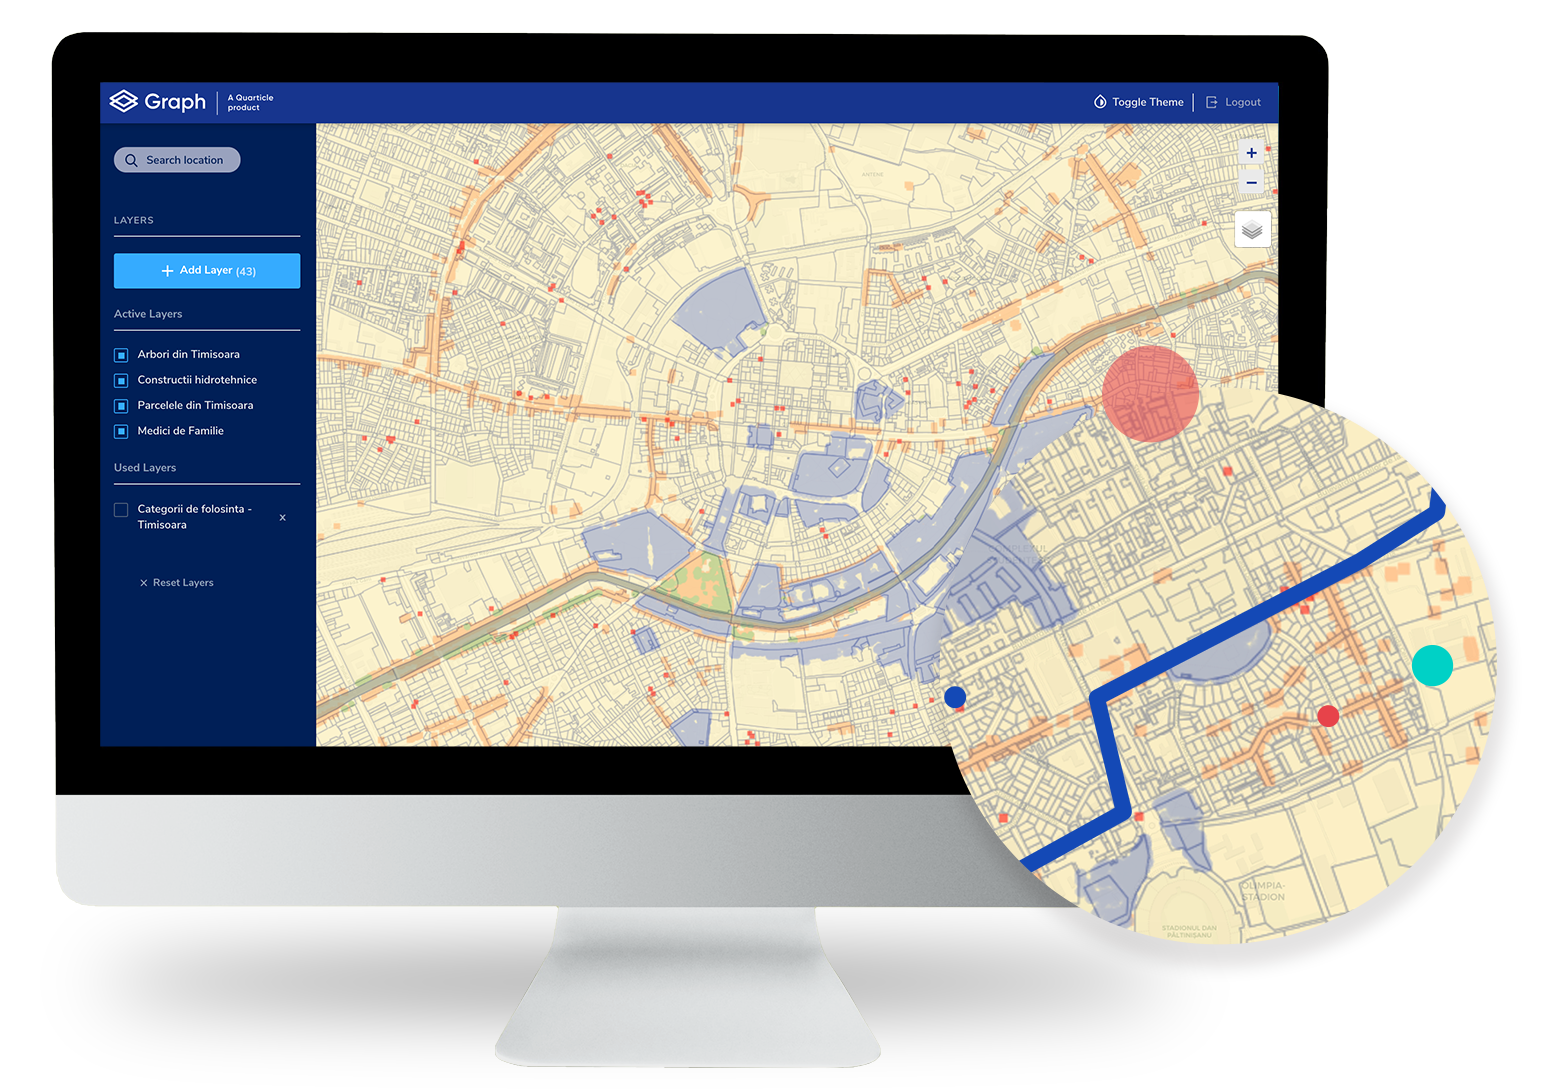 A desktop with Graph, the intuitive Gis interface and map tool